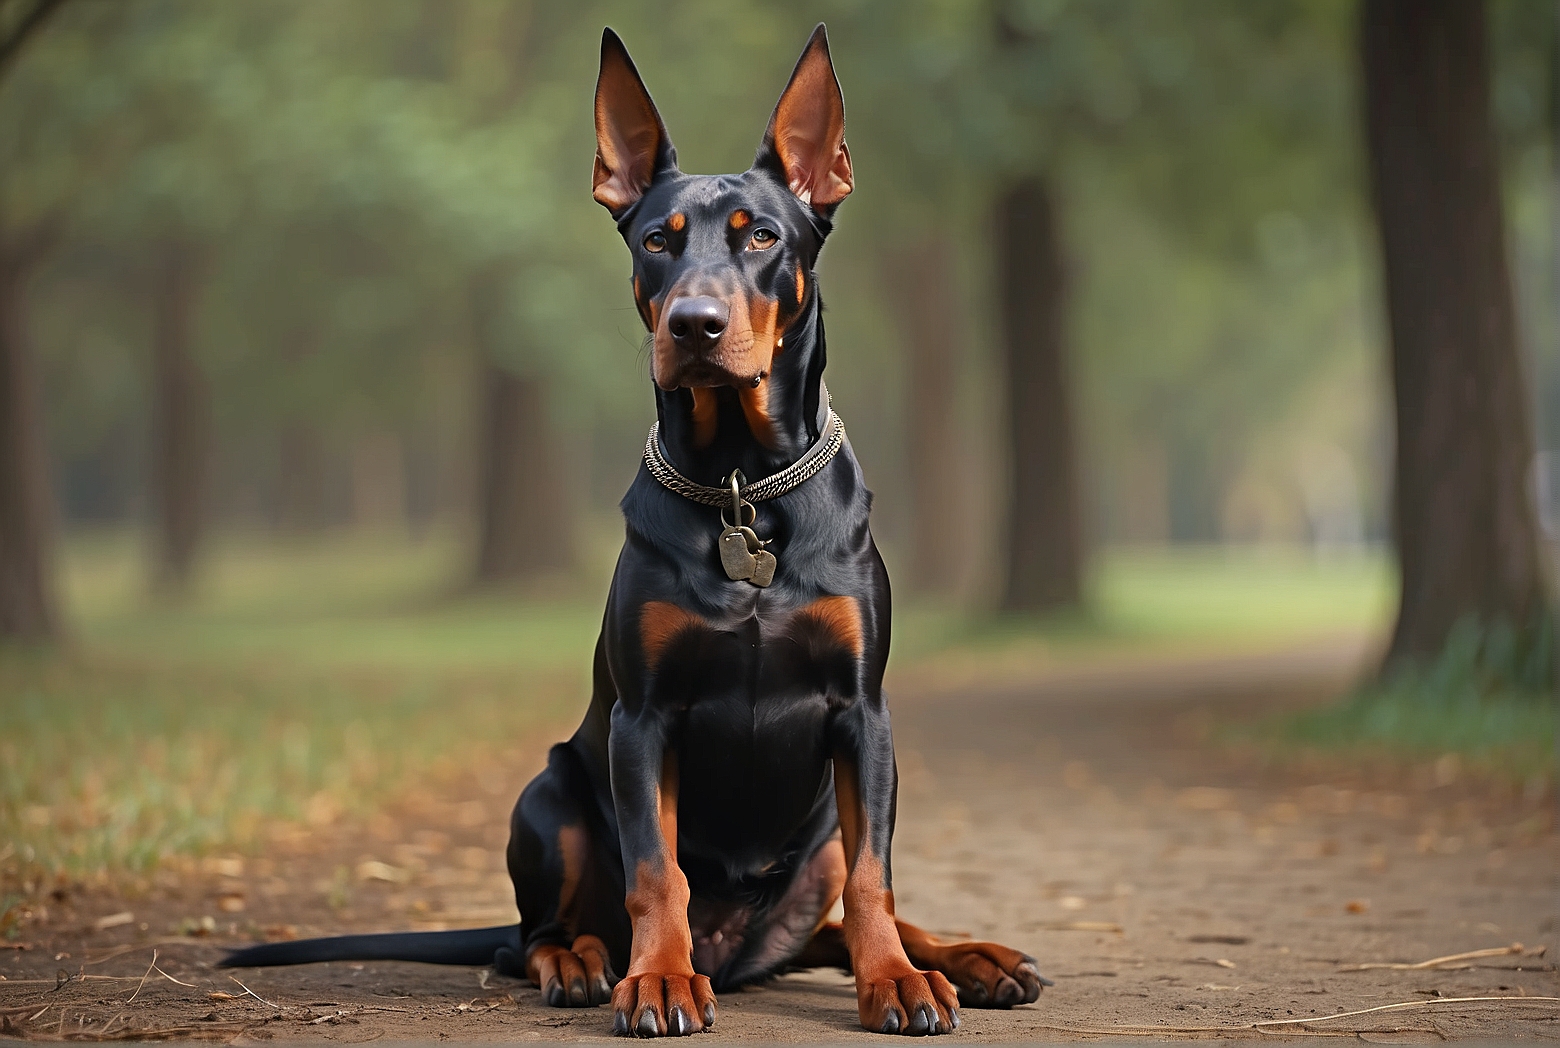 What are the different types of Dobermans?